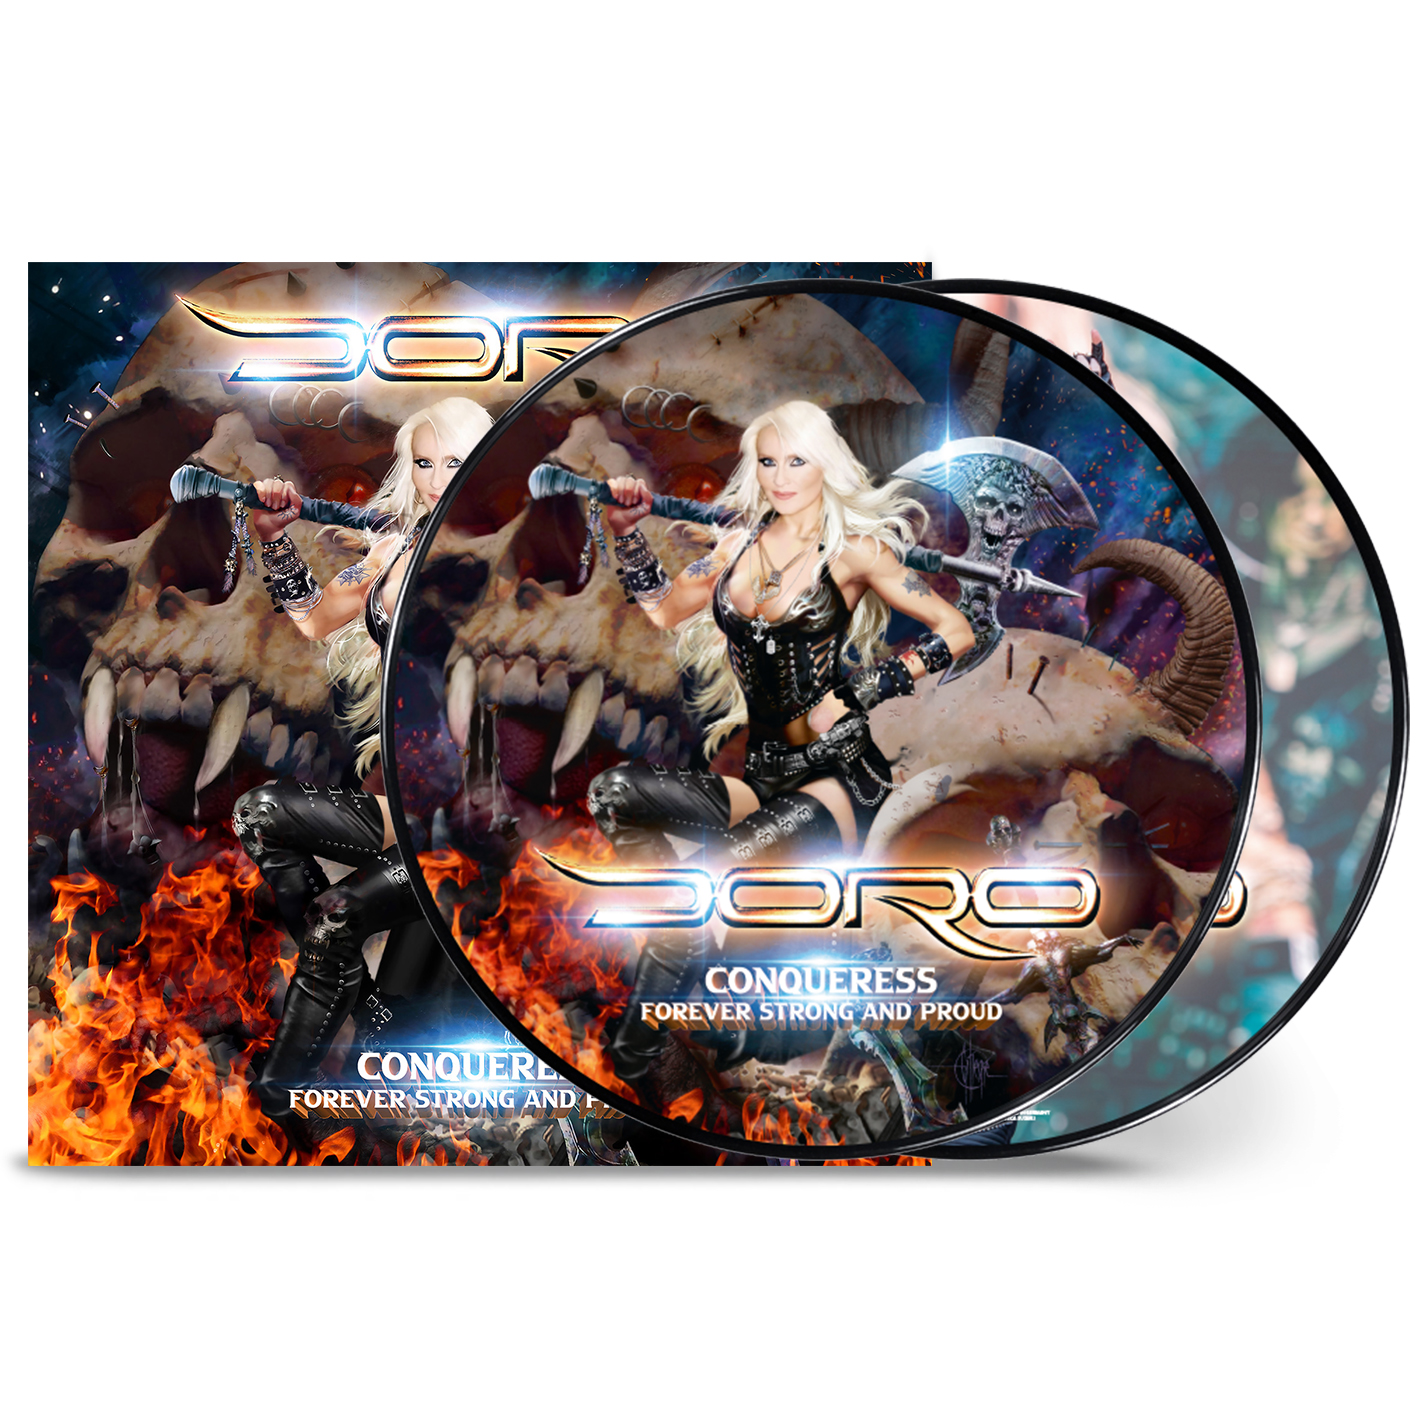 Doro - and - Conqueress - Forever Proud (Vinyl) Strong